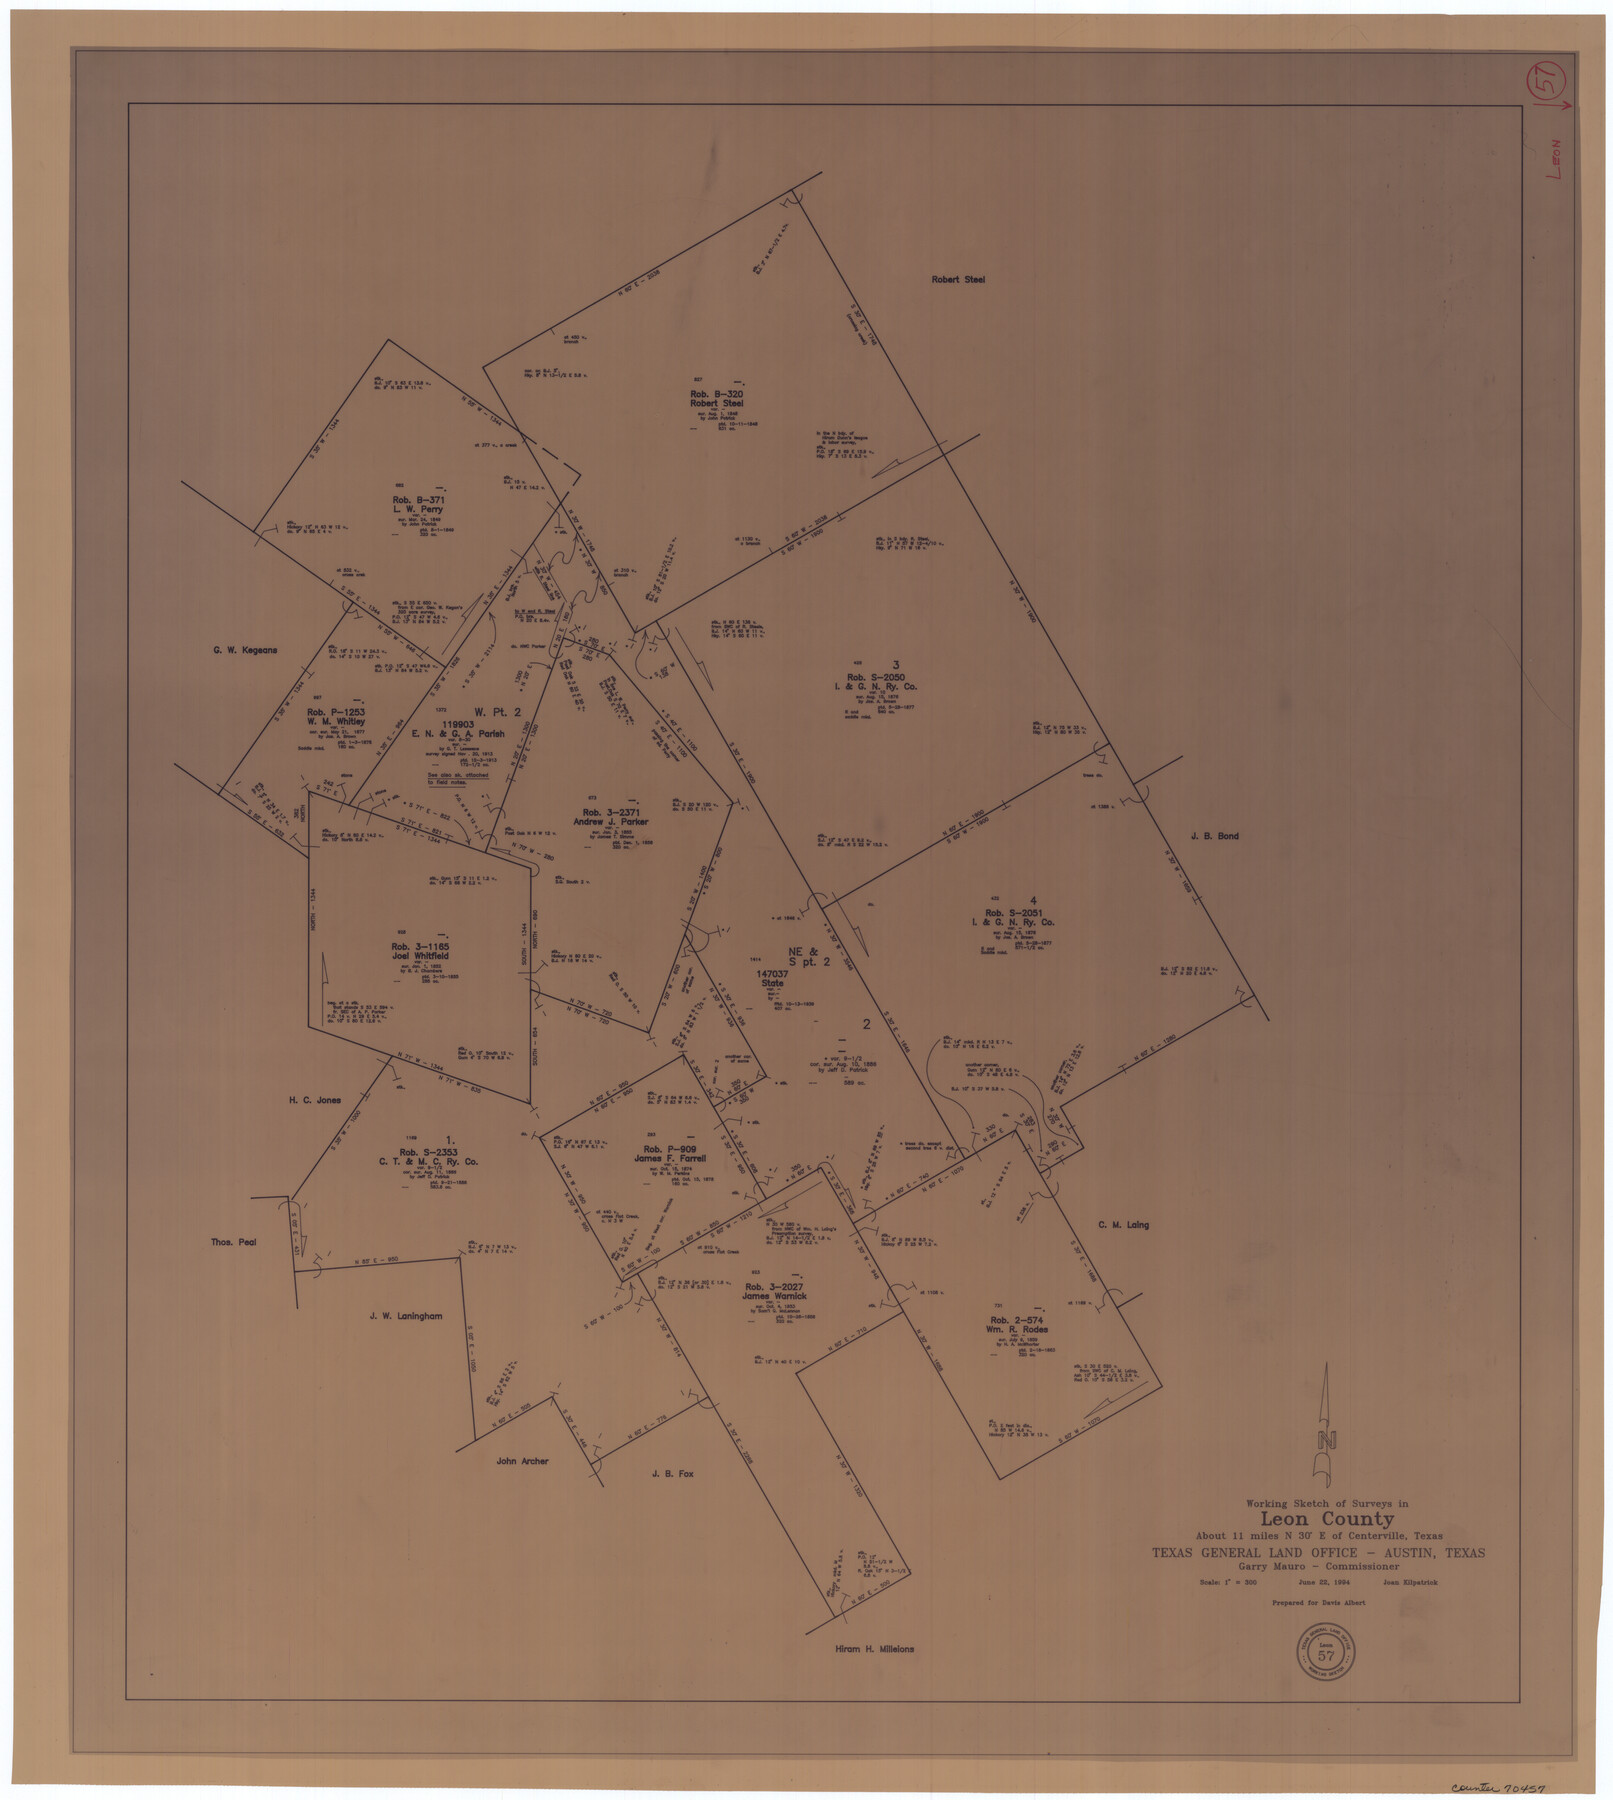 70457, Leon County Working Sketch 57, General Map Collection